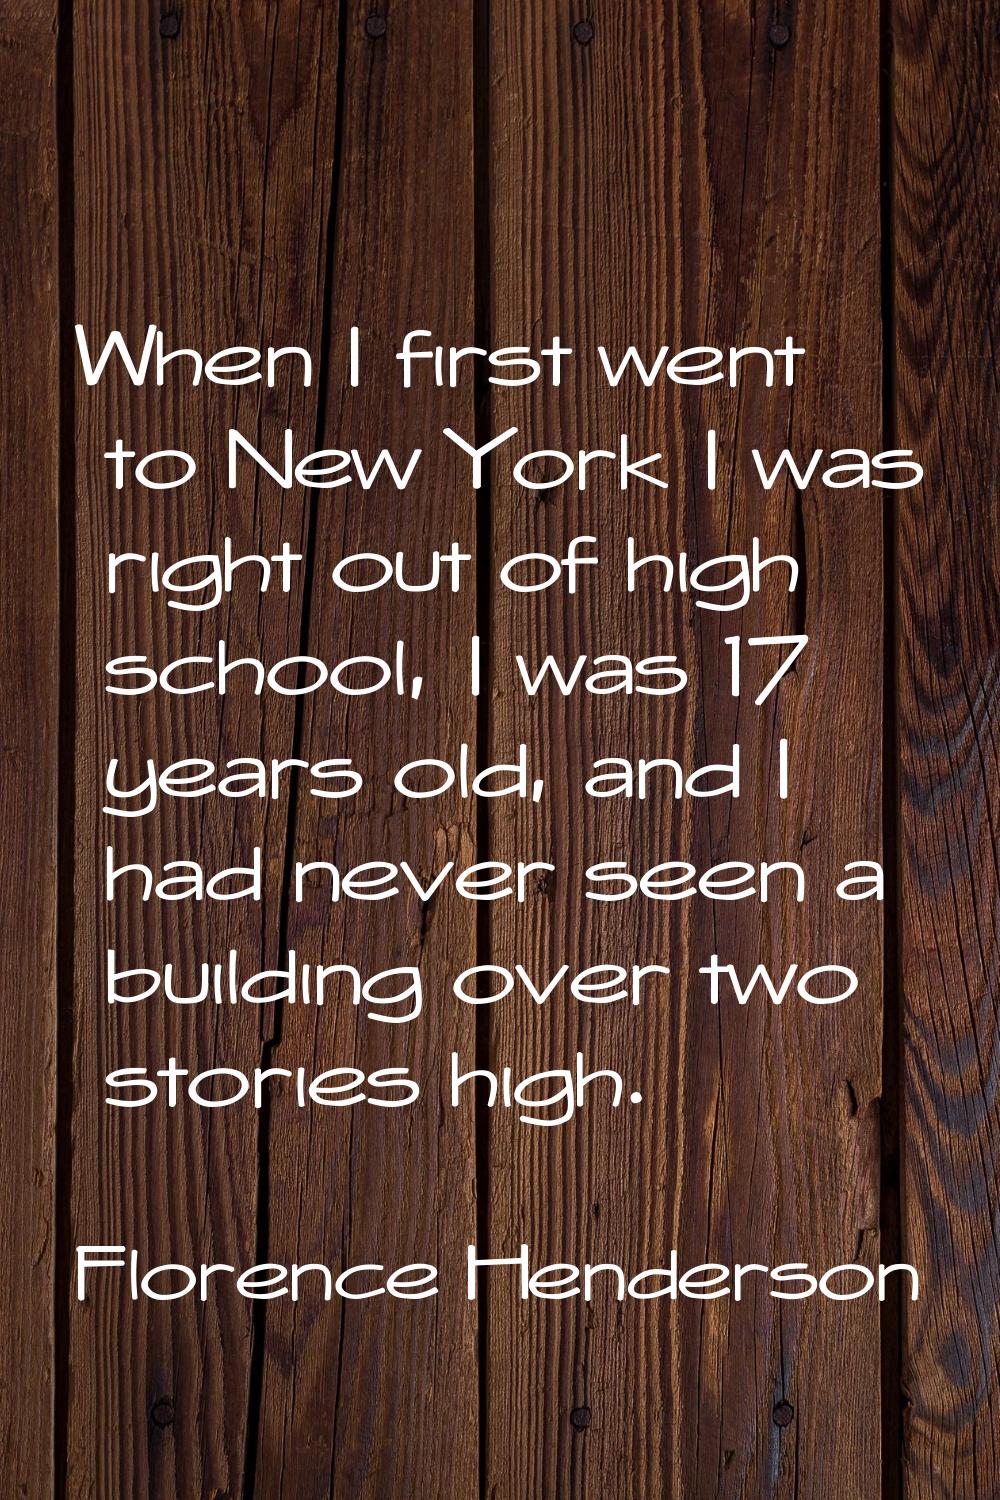 When I first went to New York I was right out of high school, I was 17 years old, and I had never s